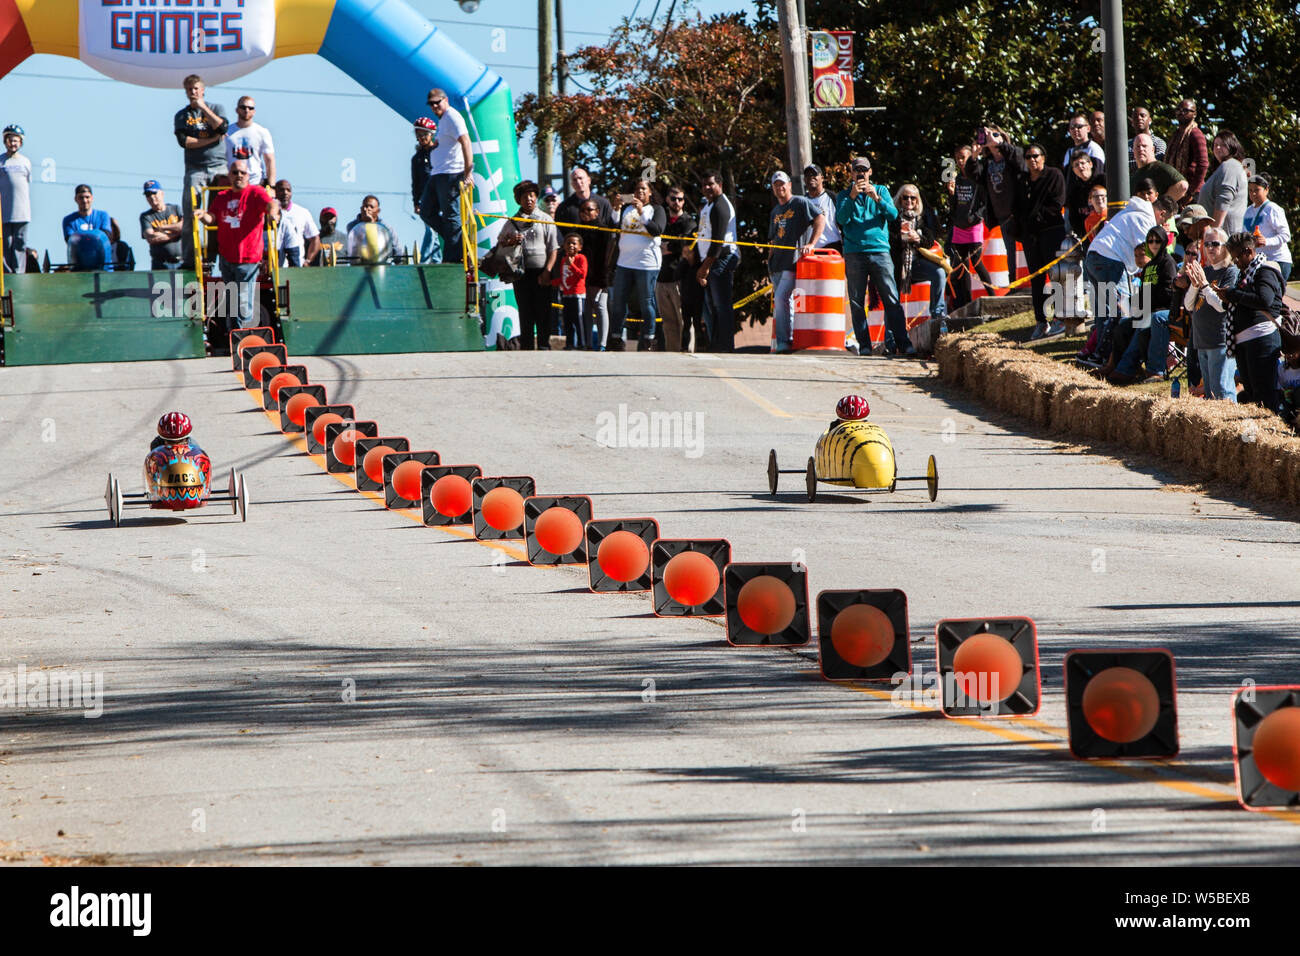 Two child competitors race their soap box derby vehicles in a close race at the Georgia Gravity Games on November 3, 2018 in Douglasville, GA. Stock Photo